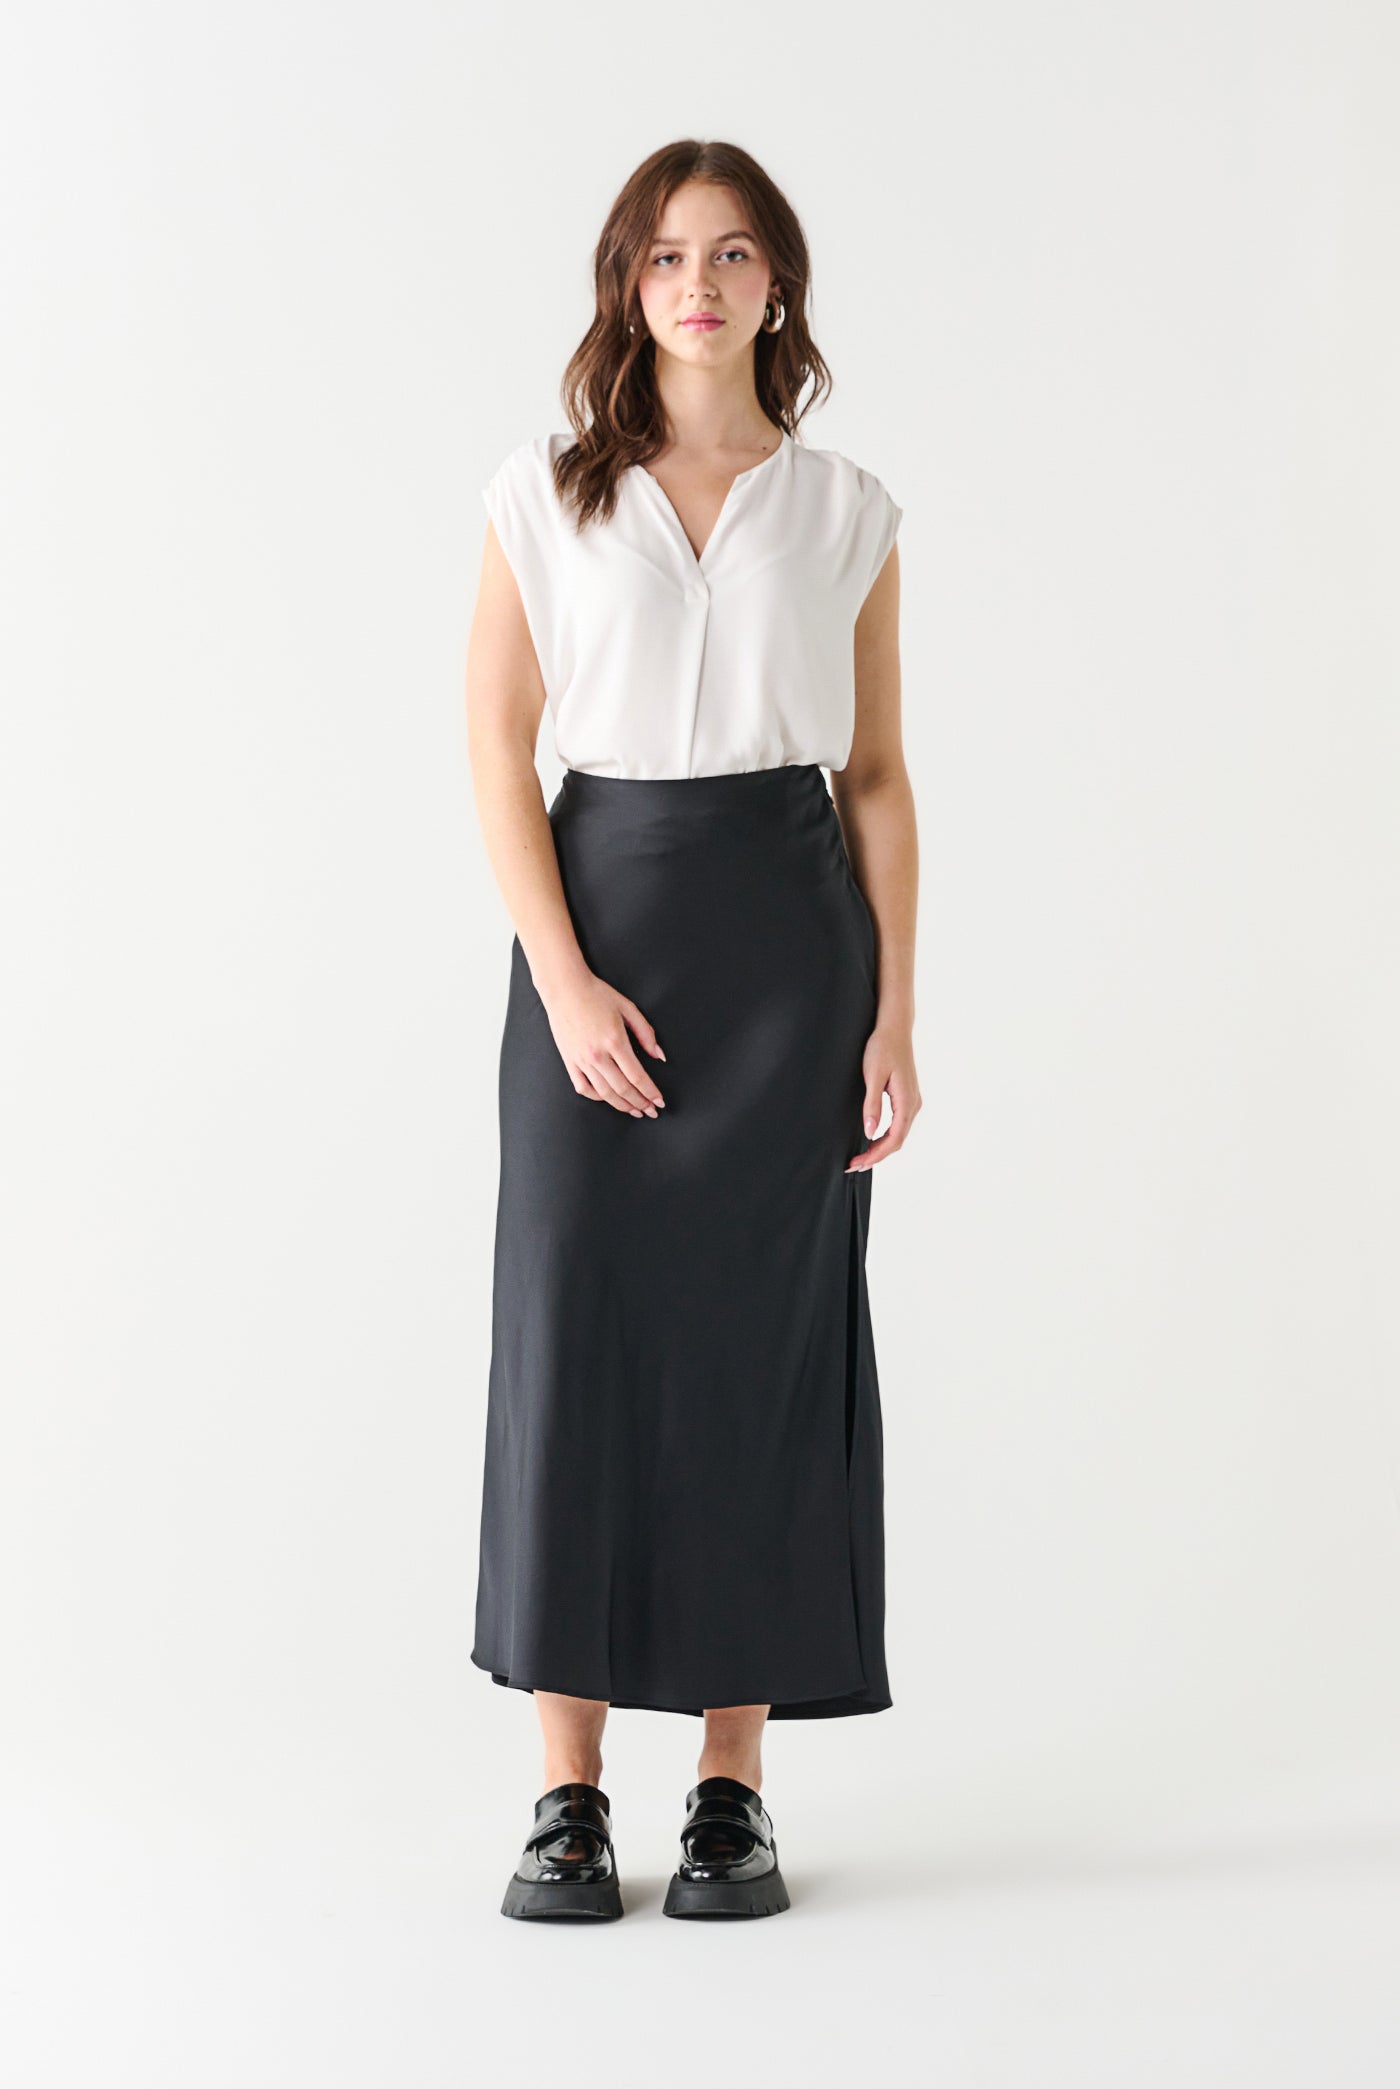 Daria Satin Maxi Skirt-Skirts-Vixen Collection, Day Spa and Women's Boutique Located in Seattle, Washington